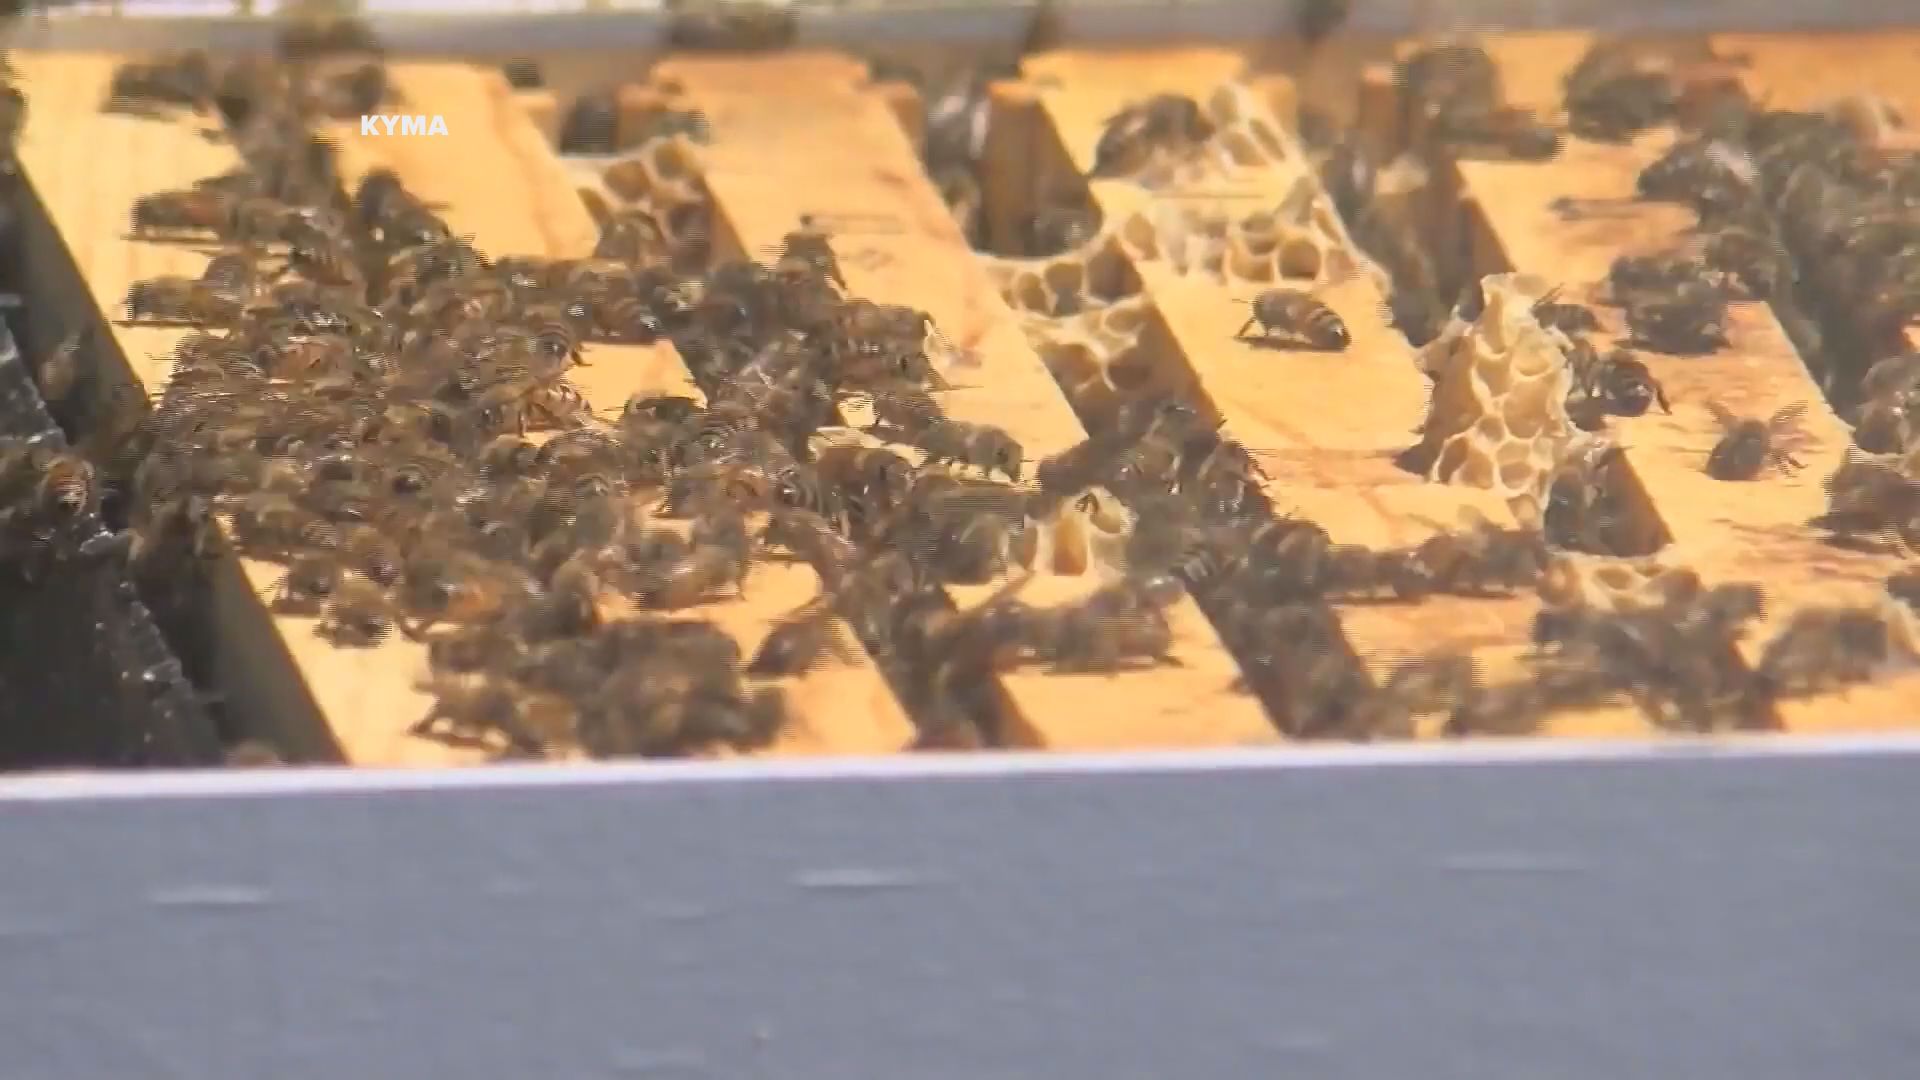 A 51-year-old Yuma man is dead after numerous bees from a hive stung him, the Yavapai County Sheriff's Office said. Responders sprayed him with water and were able to get him transported to the hospital, where he was pronounced dead.